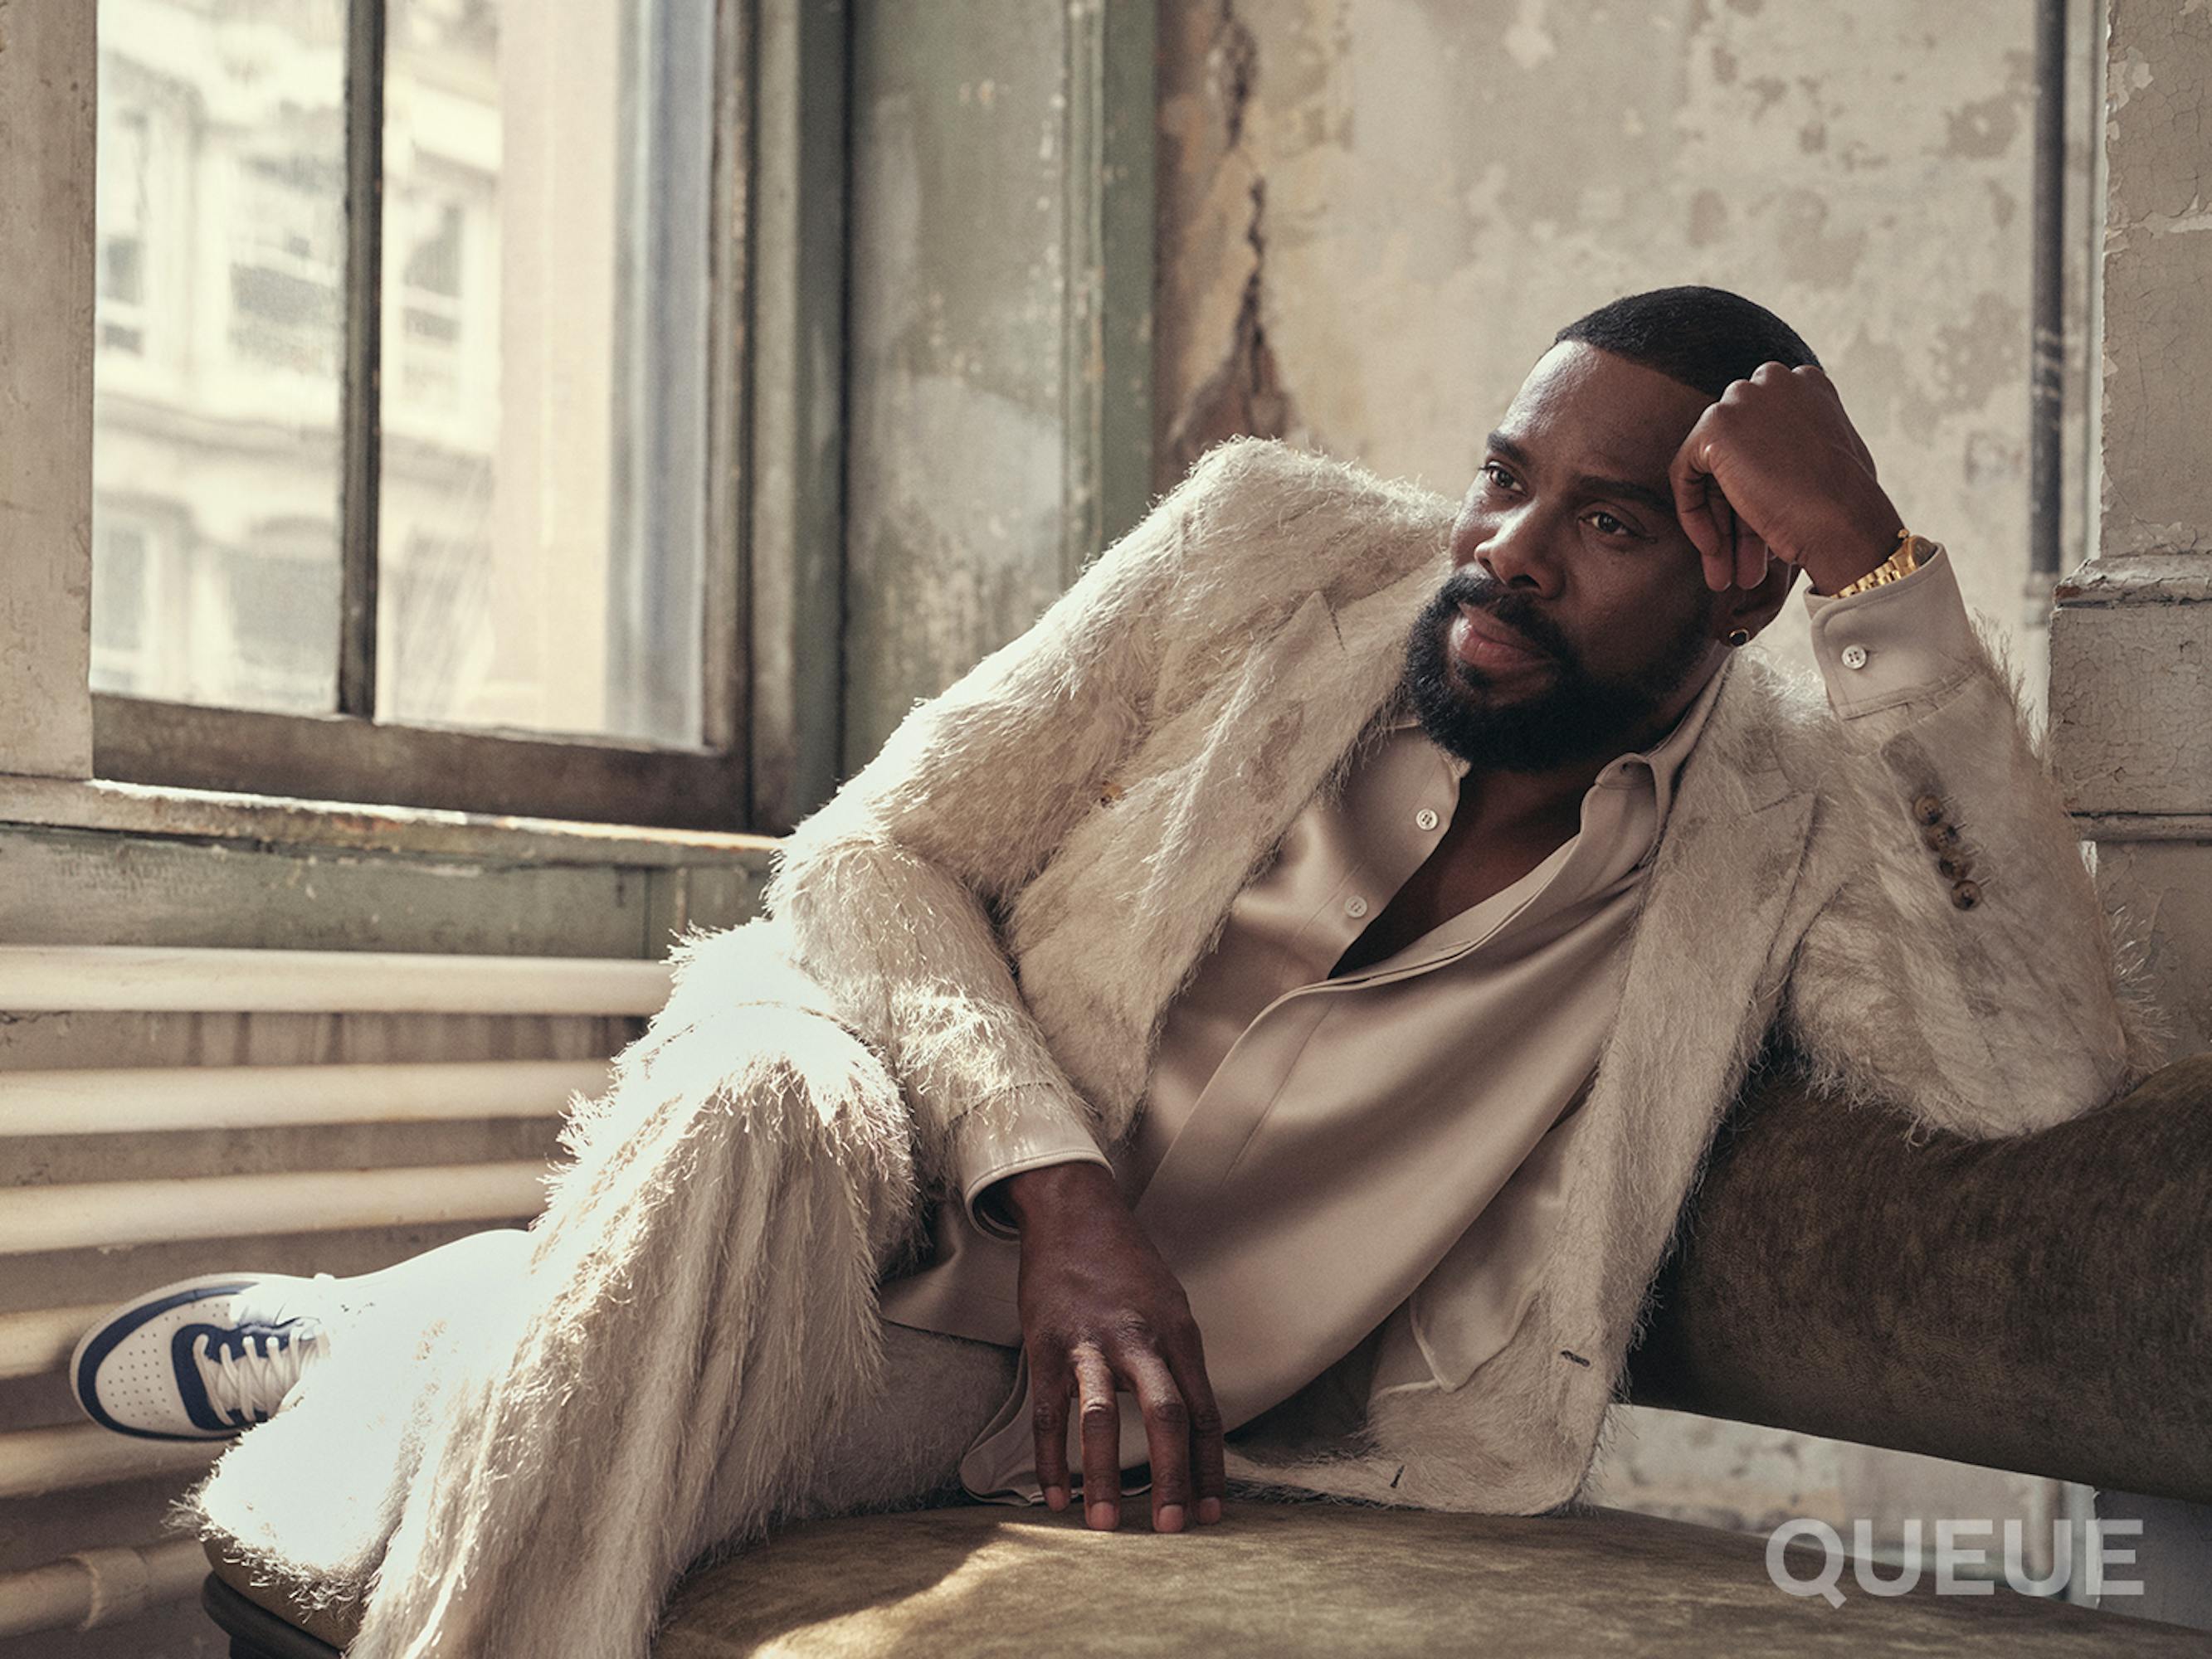 Colman Domingo wears a cream-colored ensemble complete with silky top and furry cardigan.